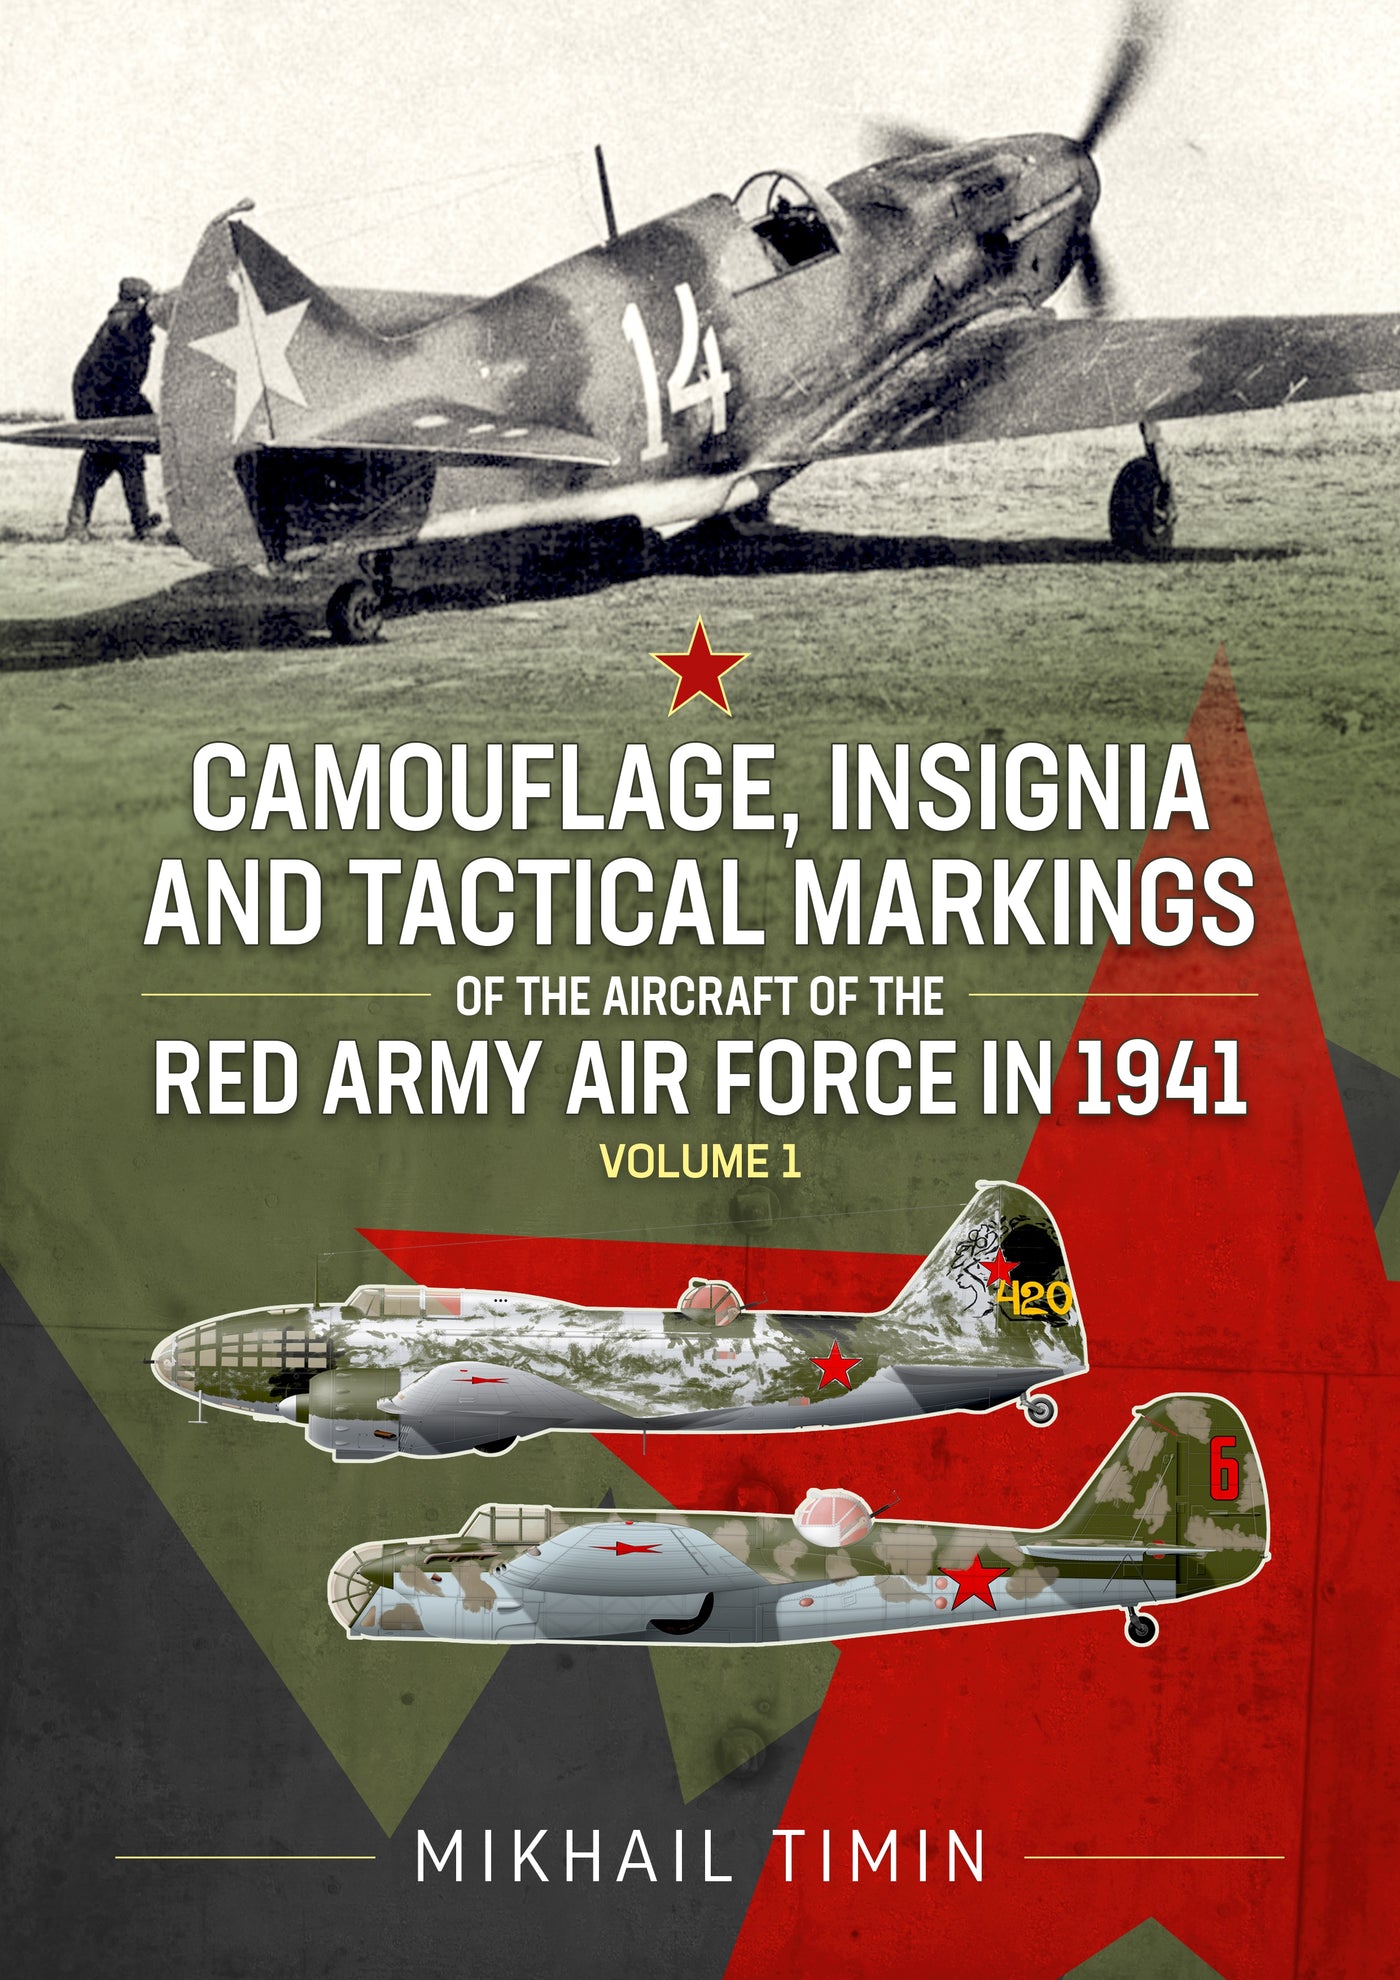 Camouflage, Insignia and Tactical Markings of the Aircraft of the Red Army Air Force in 1941